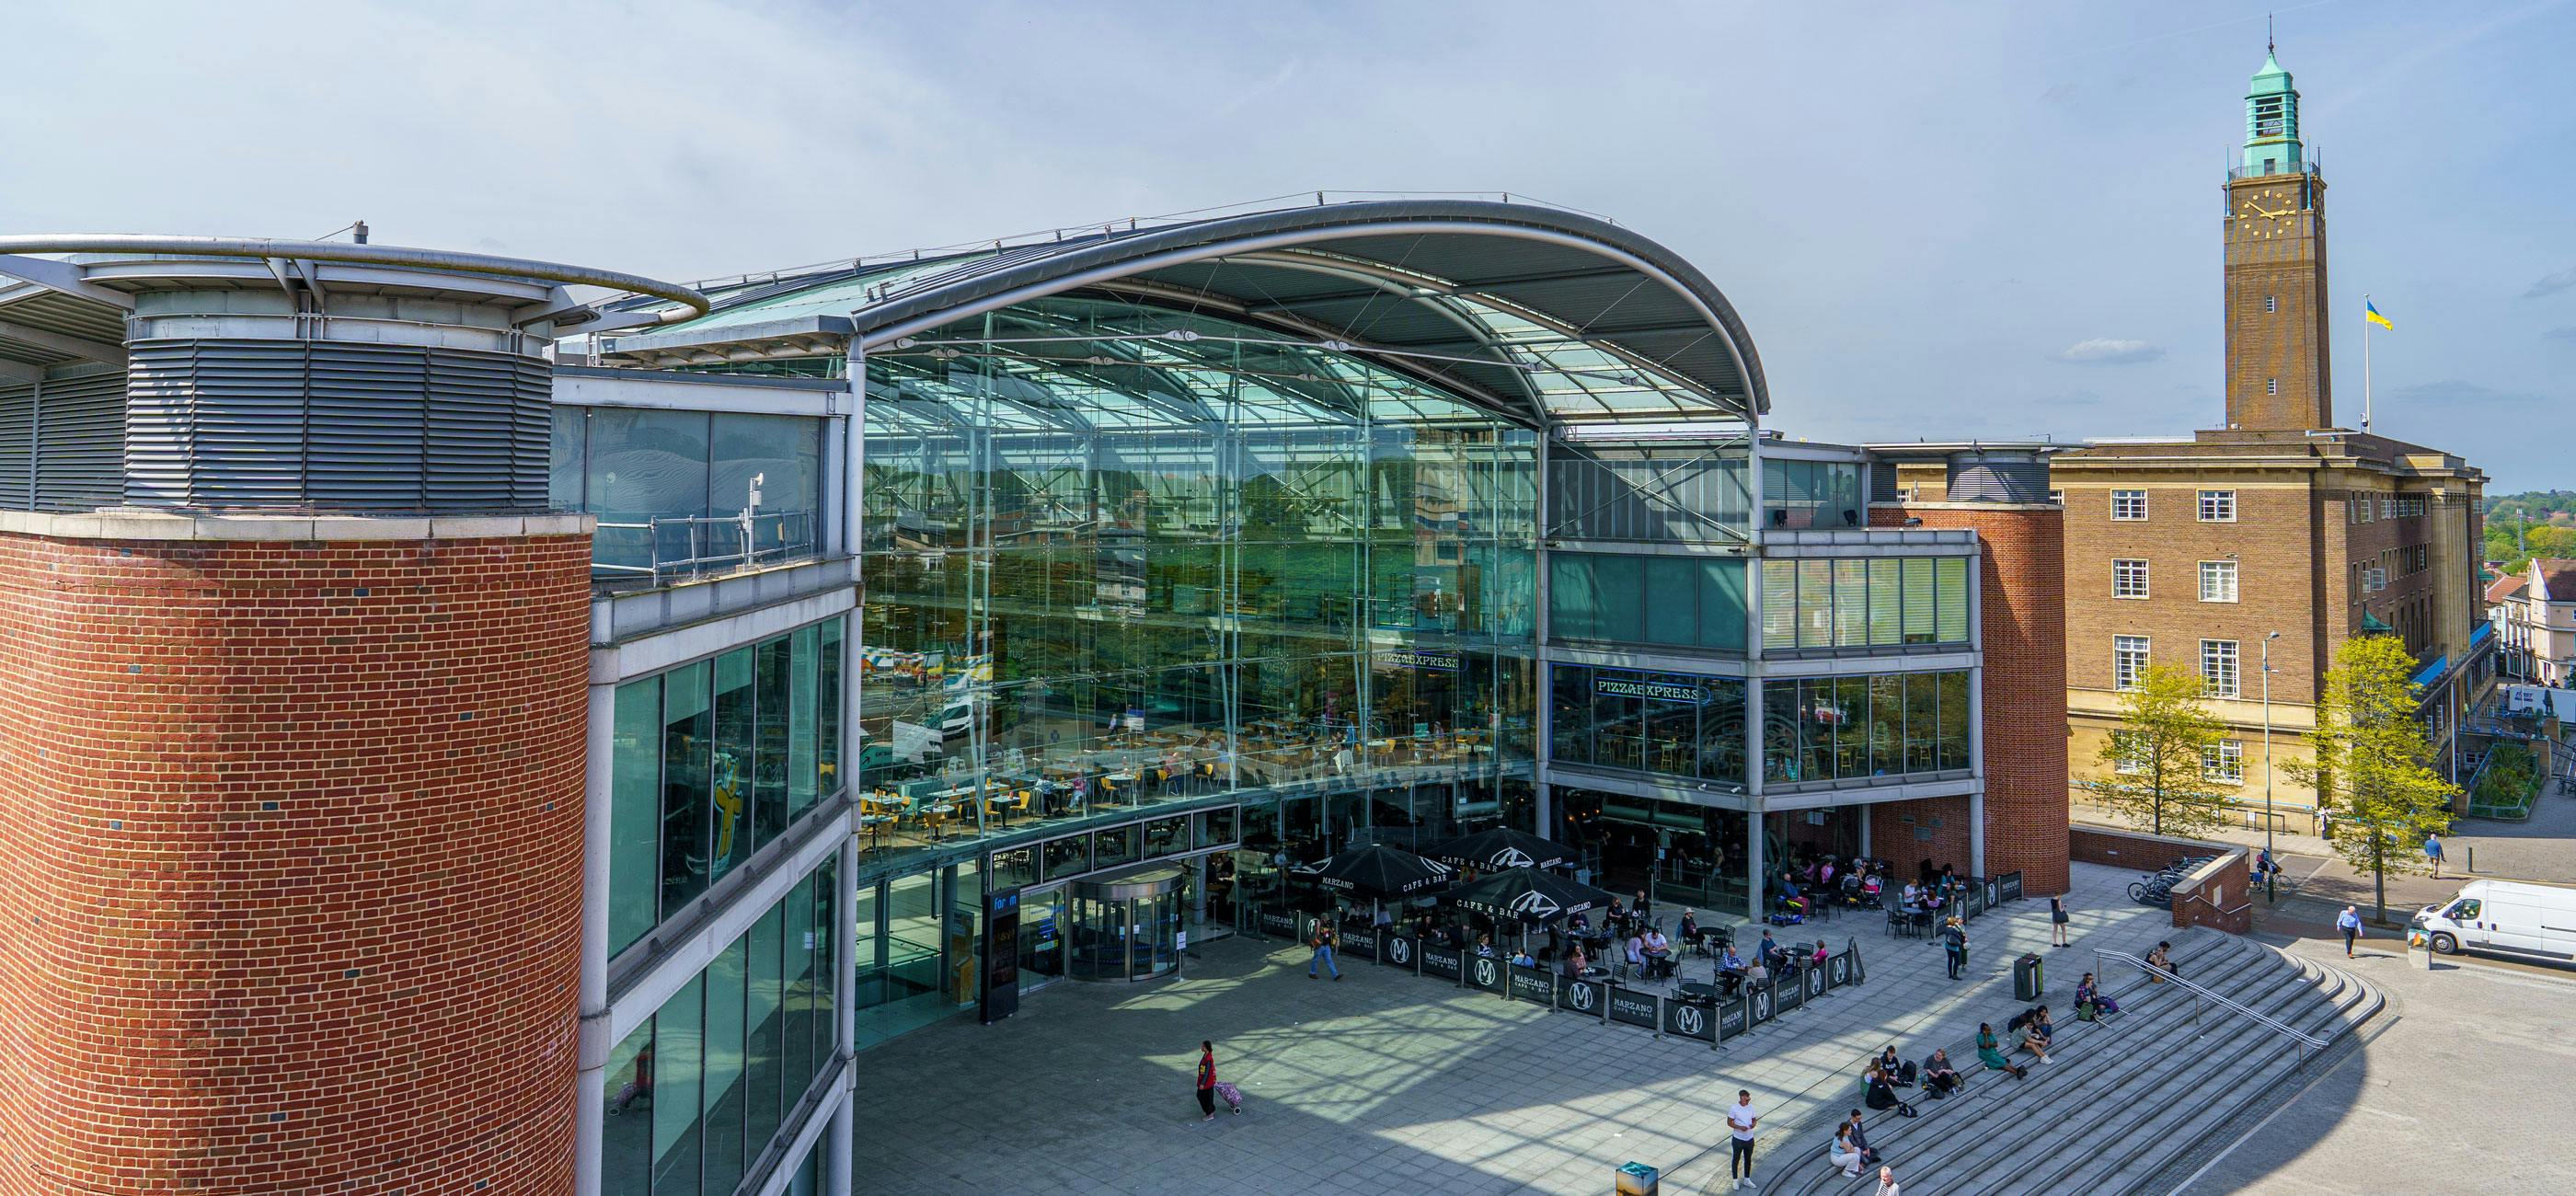 The Forum in Norwich, a modern landmark building with glass and curved roof.